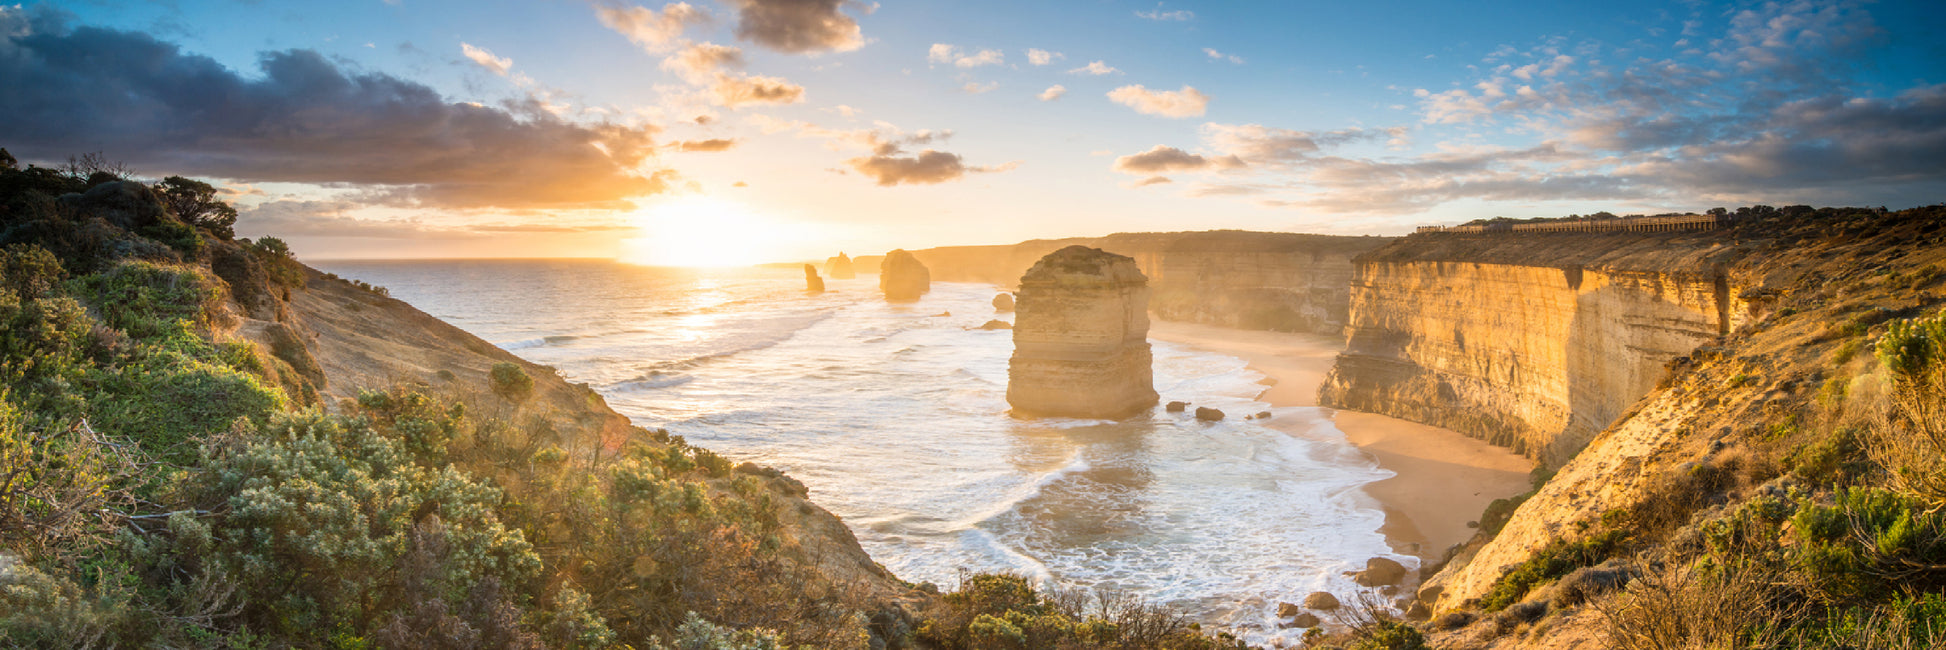 Panoramic Canvas Twelve Apostles Sunset Photograph High Quality 100% Australian Made Wall Canvas Print Ready to Hang